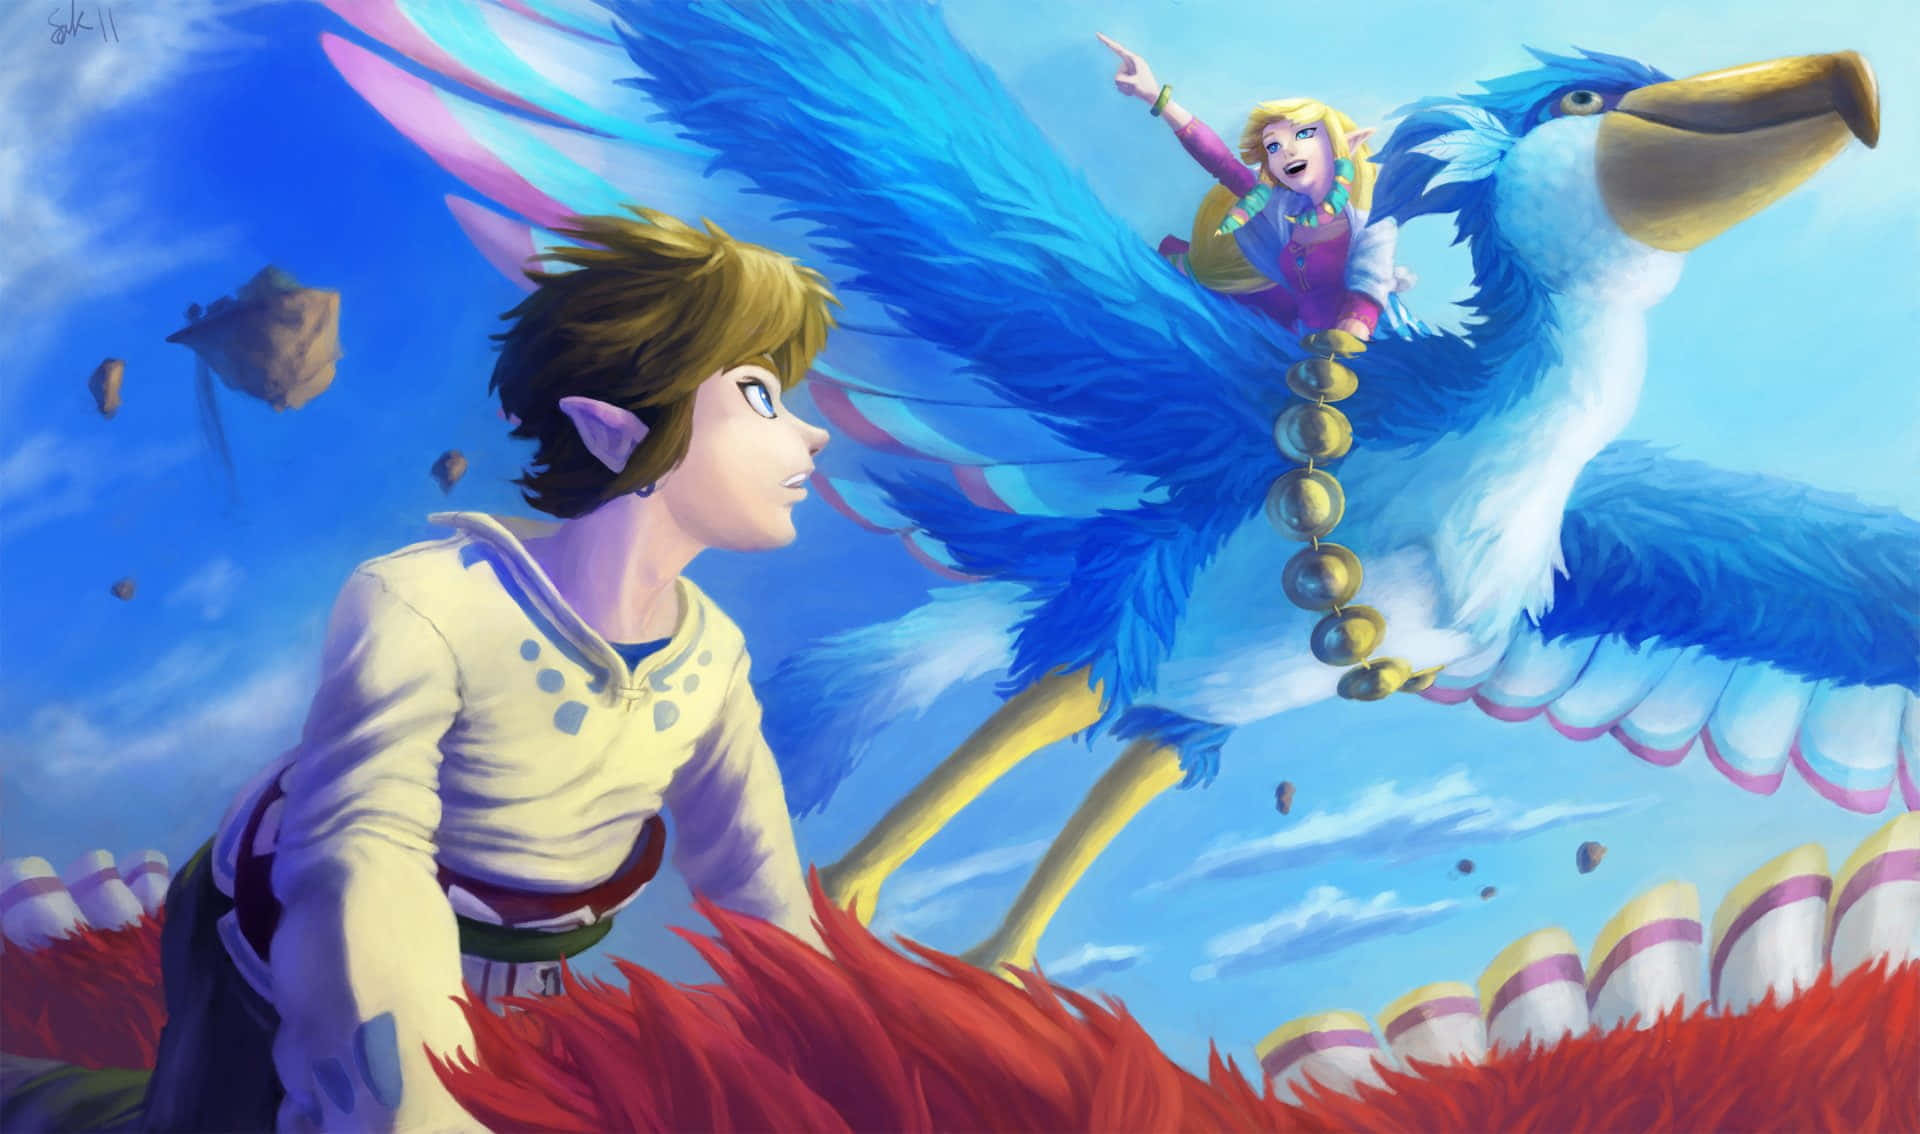 Link and his Loftwing soaring the skies in The Legend of Zelda: Skyward Sword Wallpaper